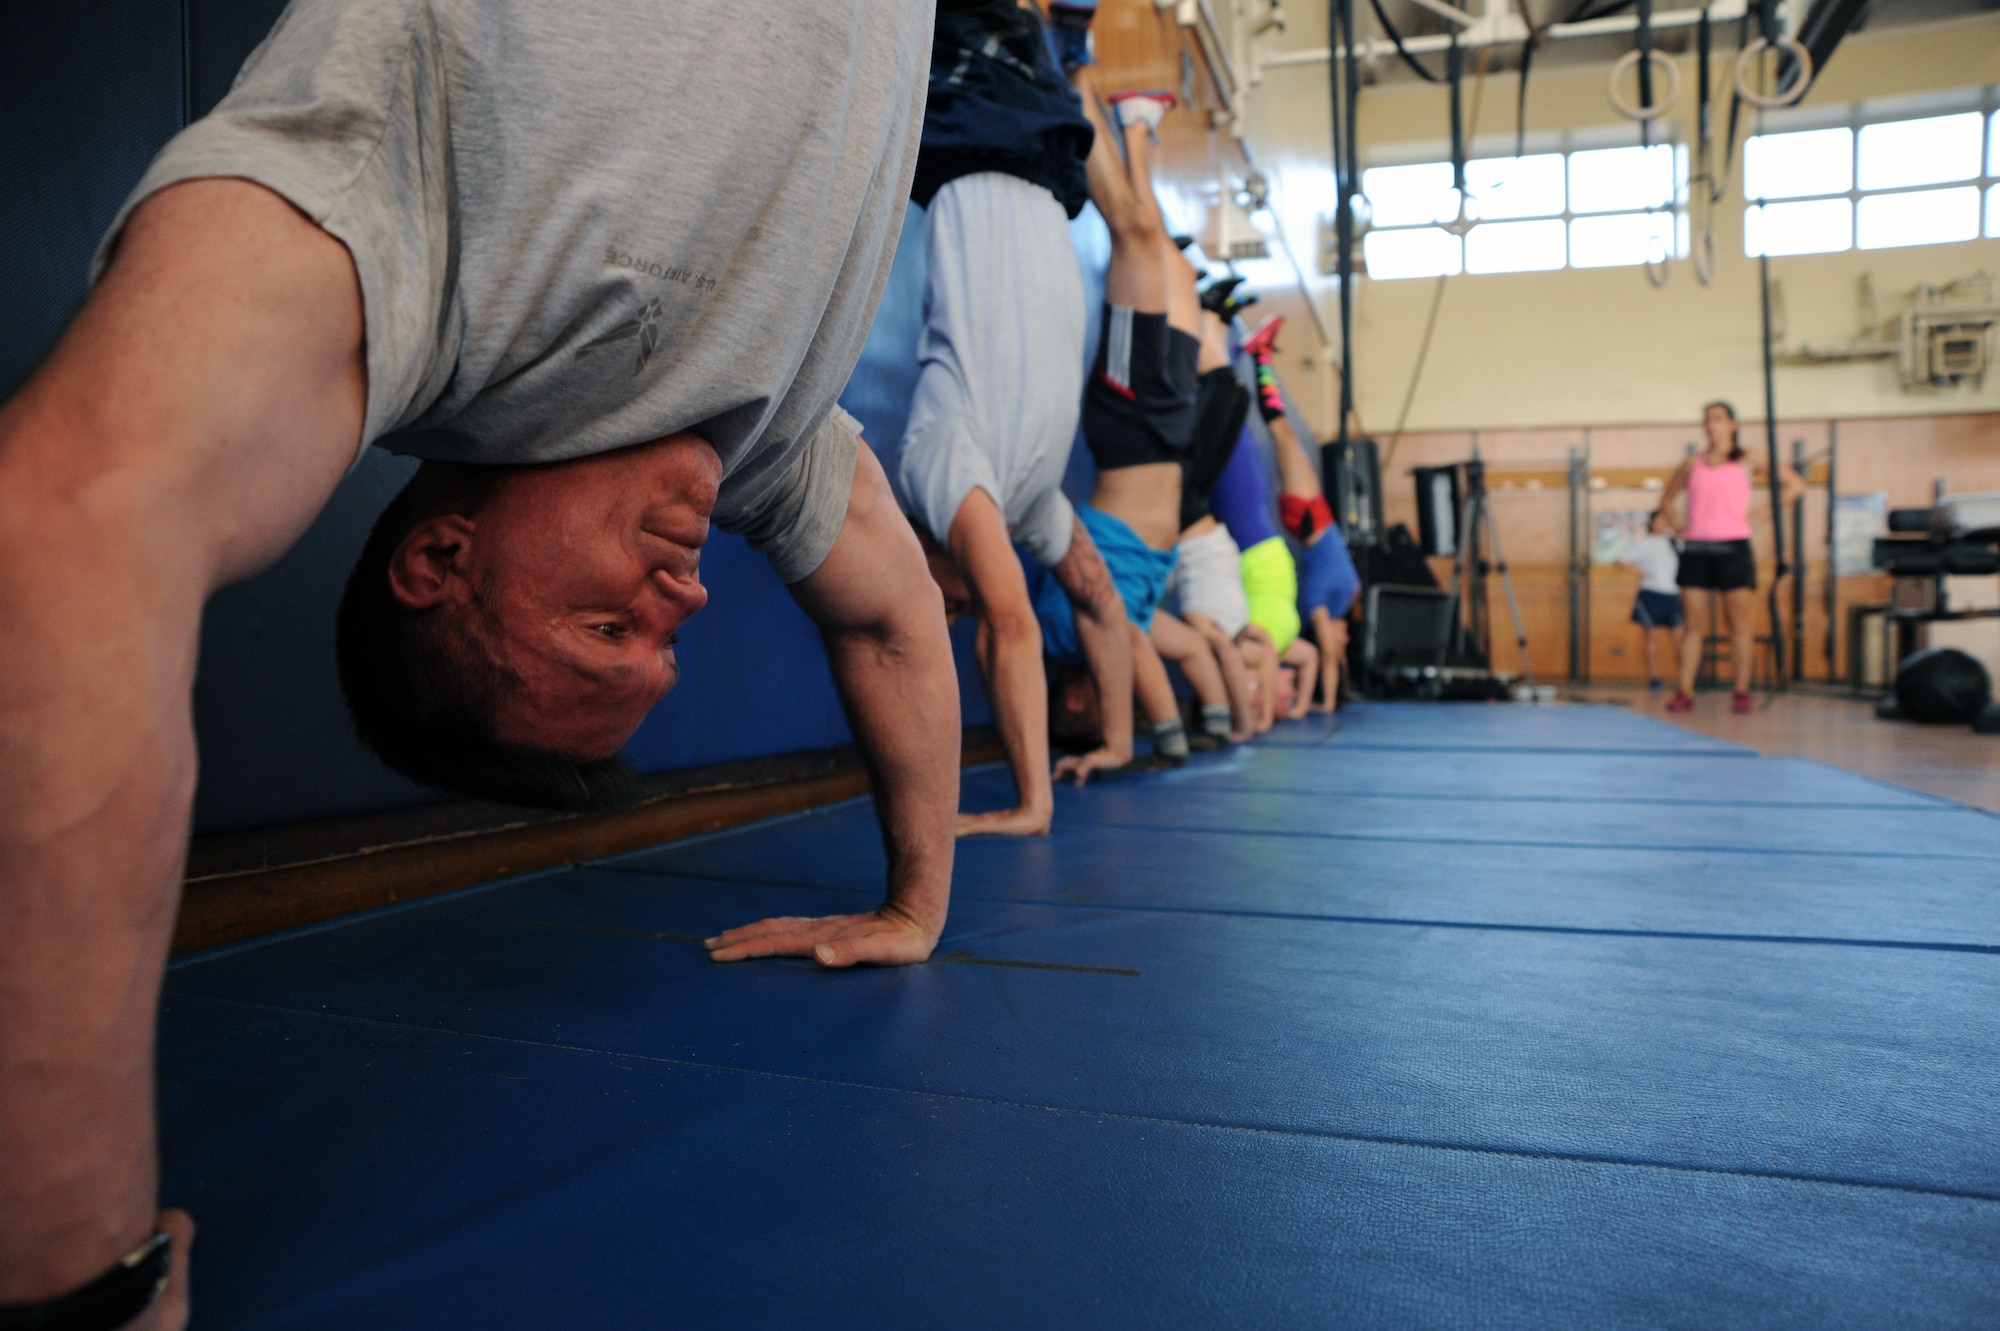 Lt. Col. Hall Sebren, 35th Maintenance Group deputy commander, performs handstand pushups at the fitness center at Misawa Air Base, Japan, Nov. 5, 2013. Sebren leads daily early morning workouts for Misawa Airmen, civilians and their dependents. (U.S. Air Force photo by Senior Airman Derek VanHorn)